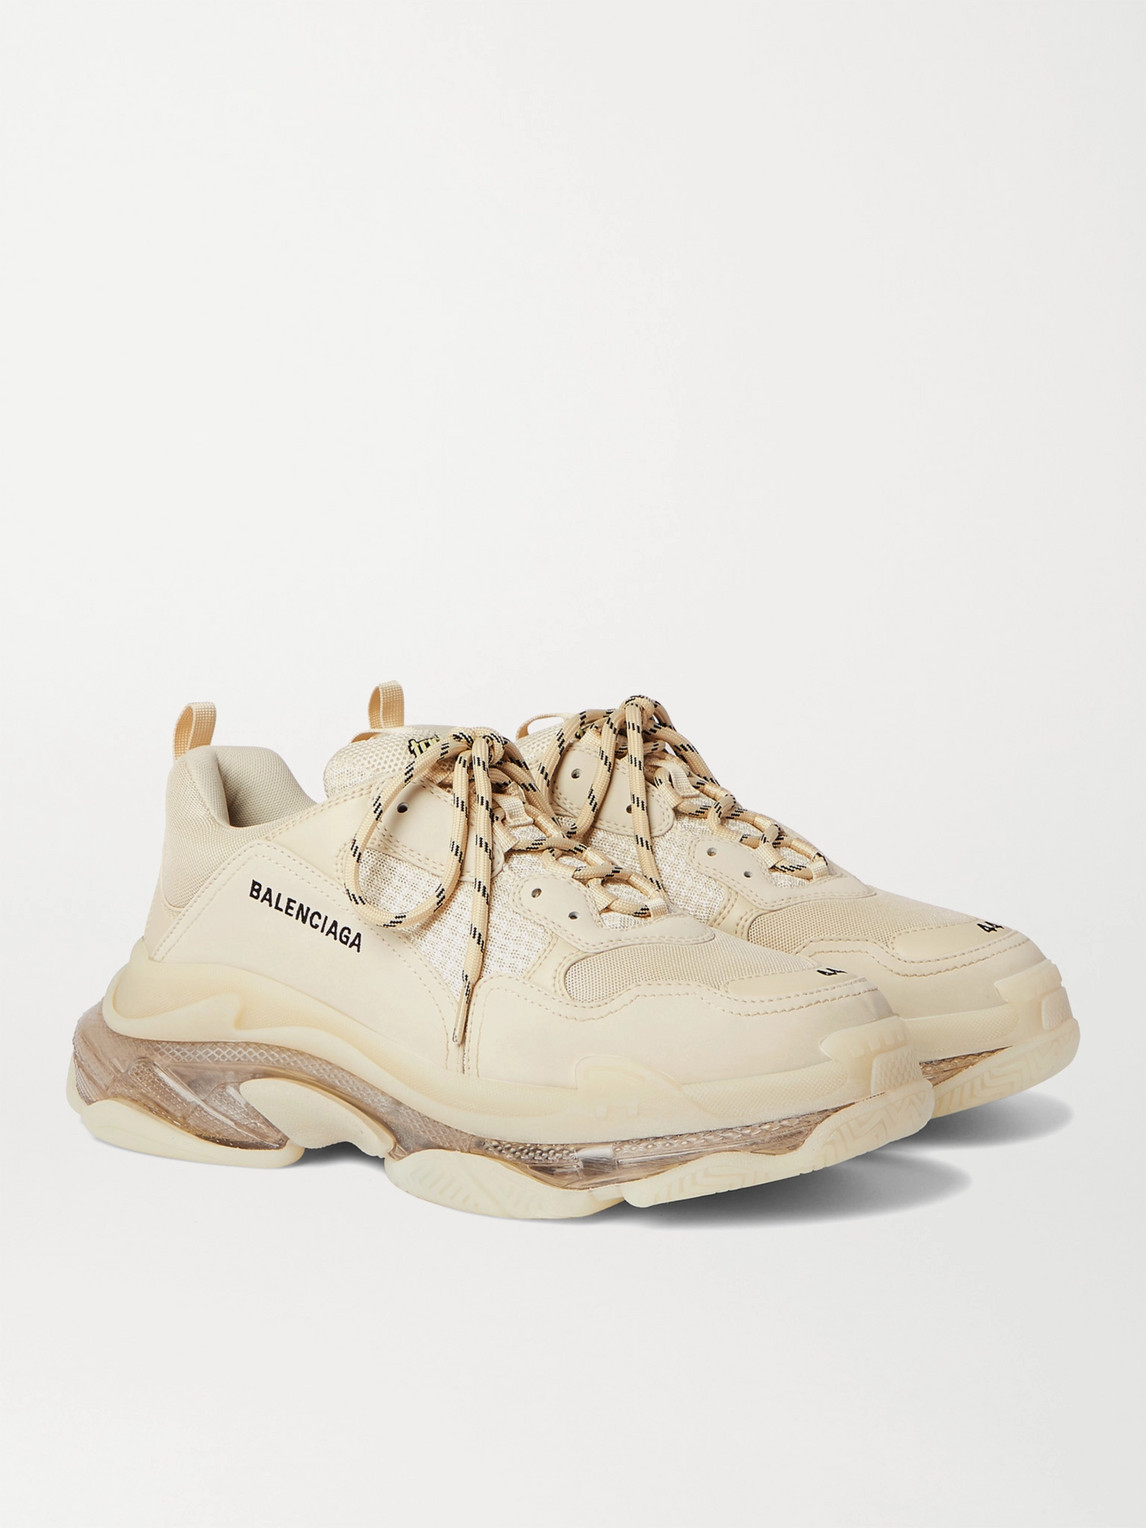 Balenciaga Triple S Clear Sole Mesh, Nubuck And Leather Sneakers In Neutrals